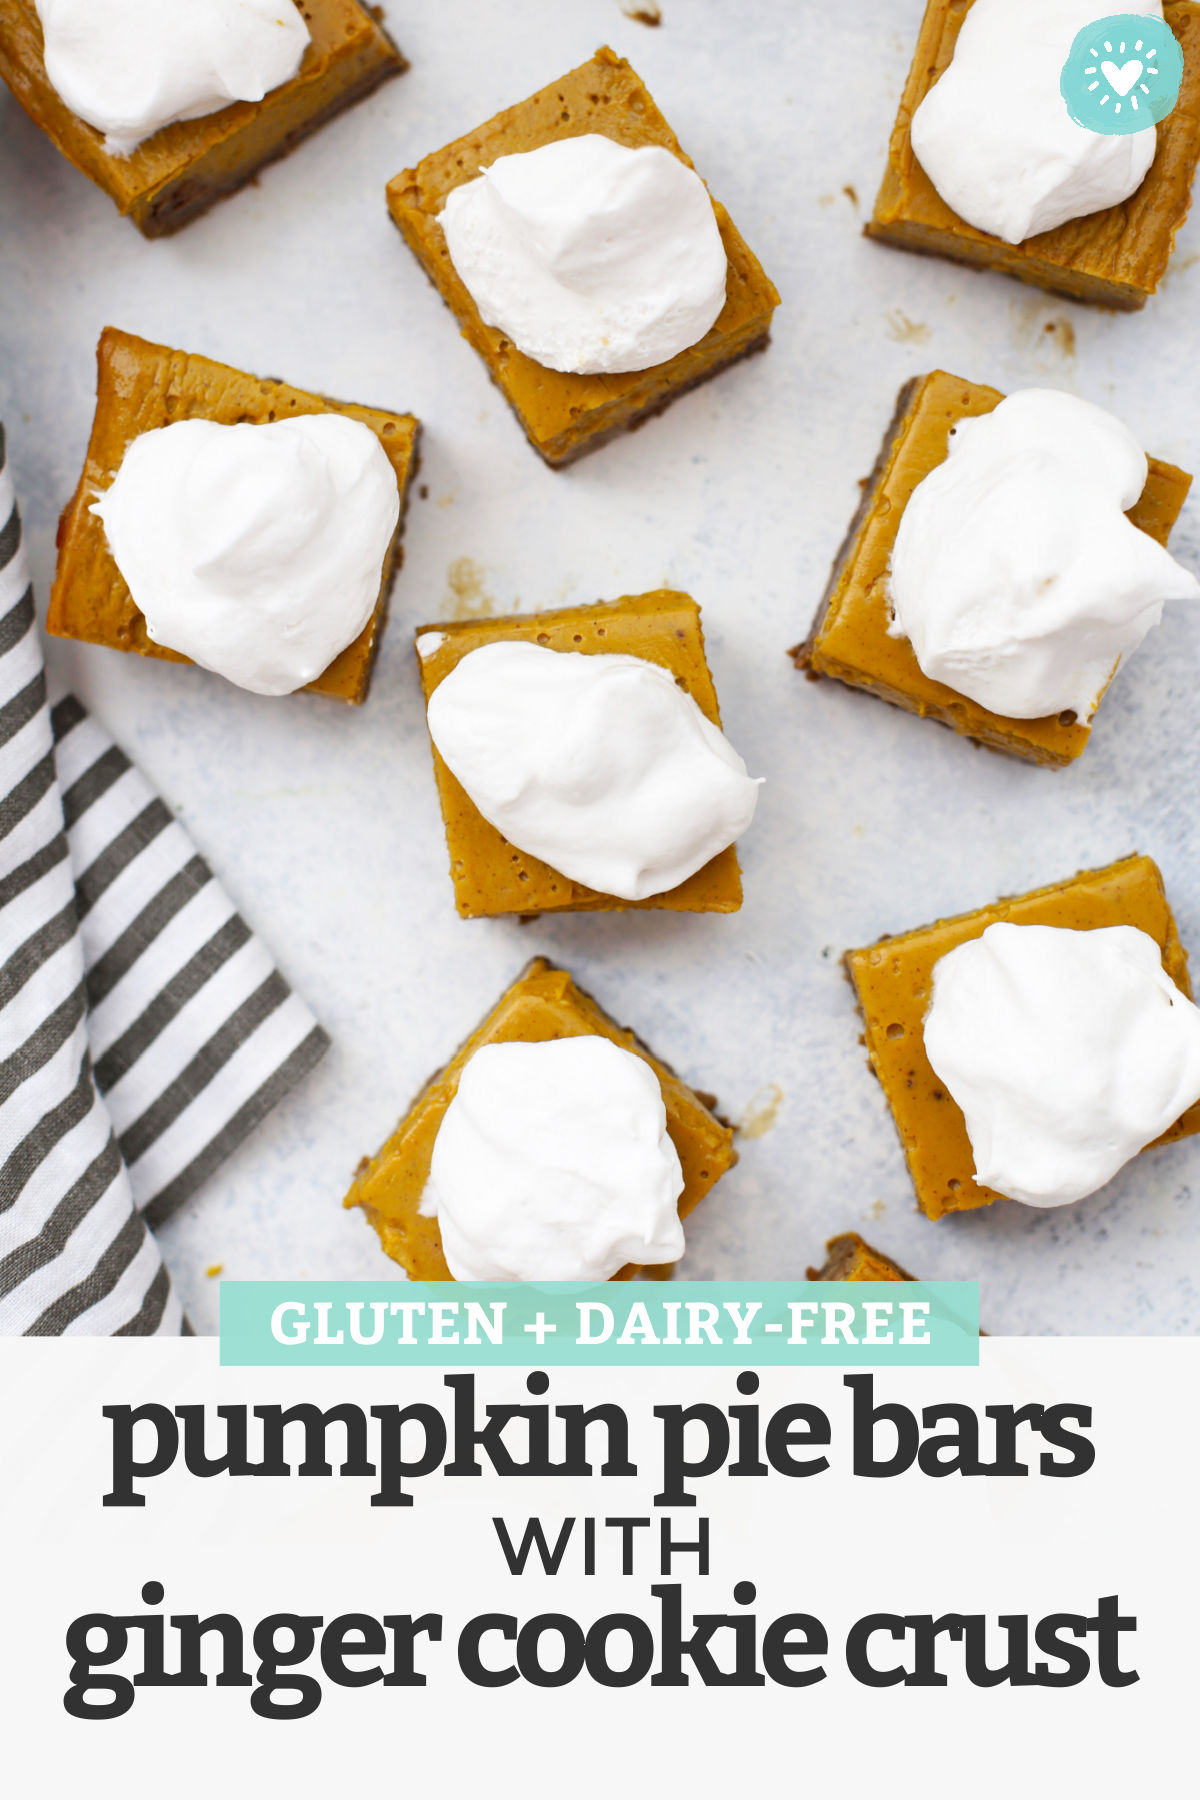 Gluten-Free Pumpkin Pie Bars with Ginger Cookie Crust – Swap out the pumpkin pie for these easy gluten-free pumpkin pie bars. The cookie crust makes them so easy! They slice and serve like a dream! Dairy-free pumpkin pie bars // Pumpkin Pie Bars recipe // Thanksgiving Dessert // Holiday Dessert // Fall Dessert #pie #pumpkinpie #glutenfree #thanskgiving